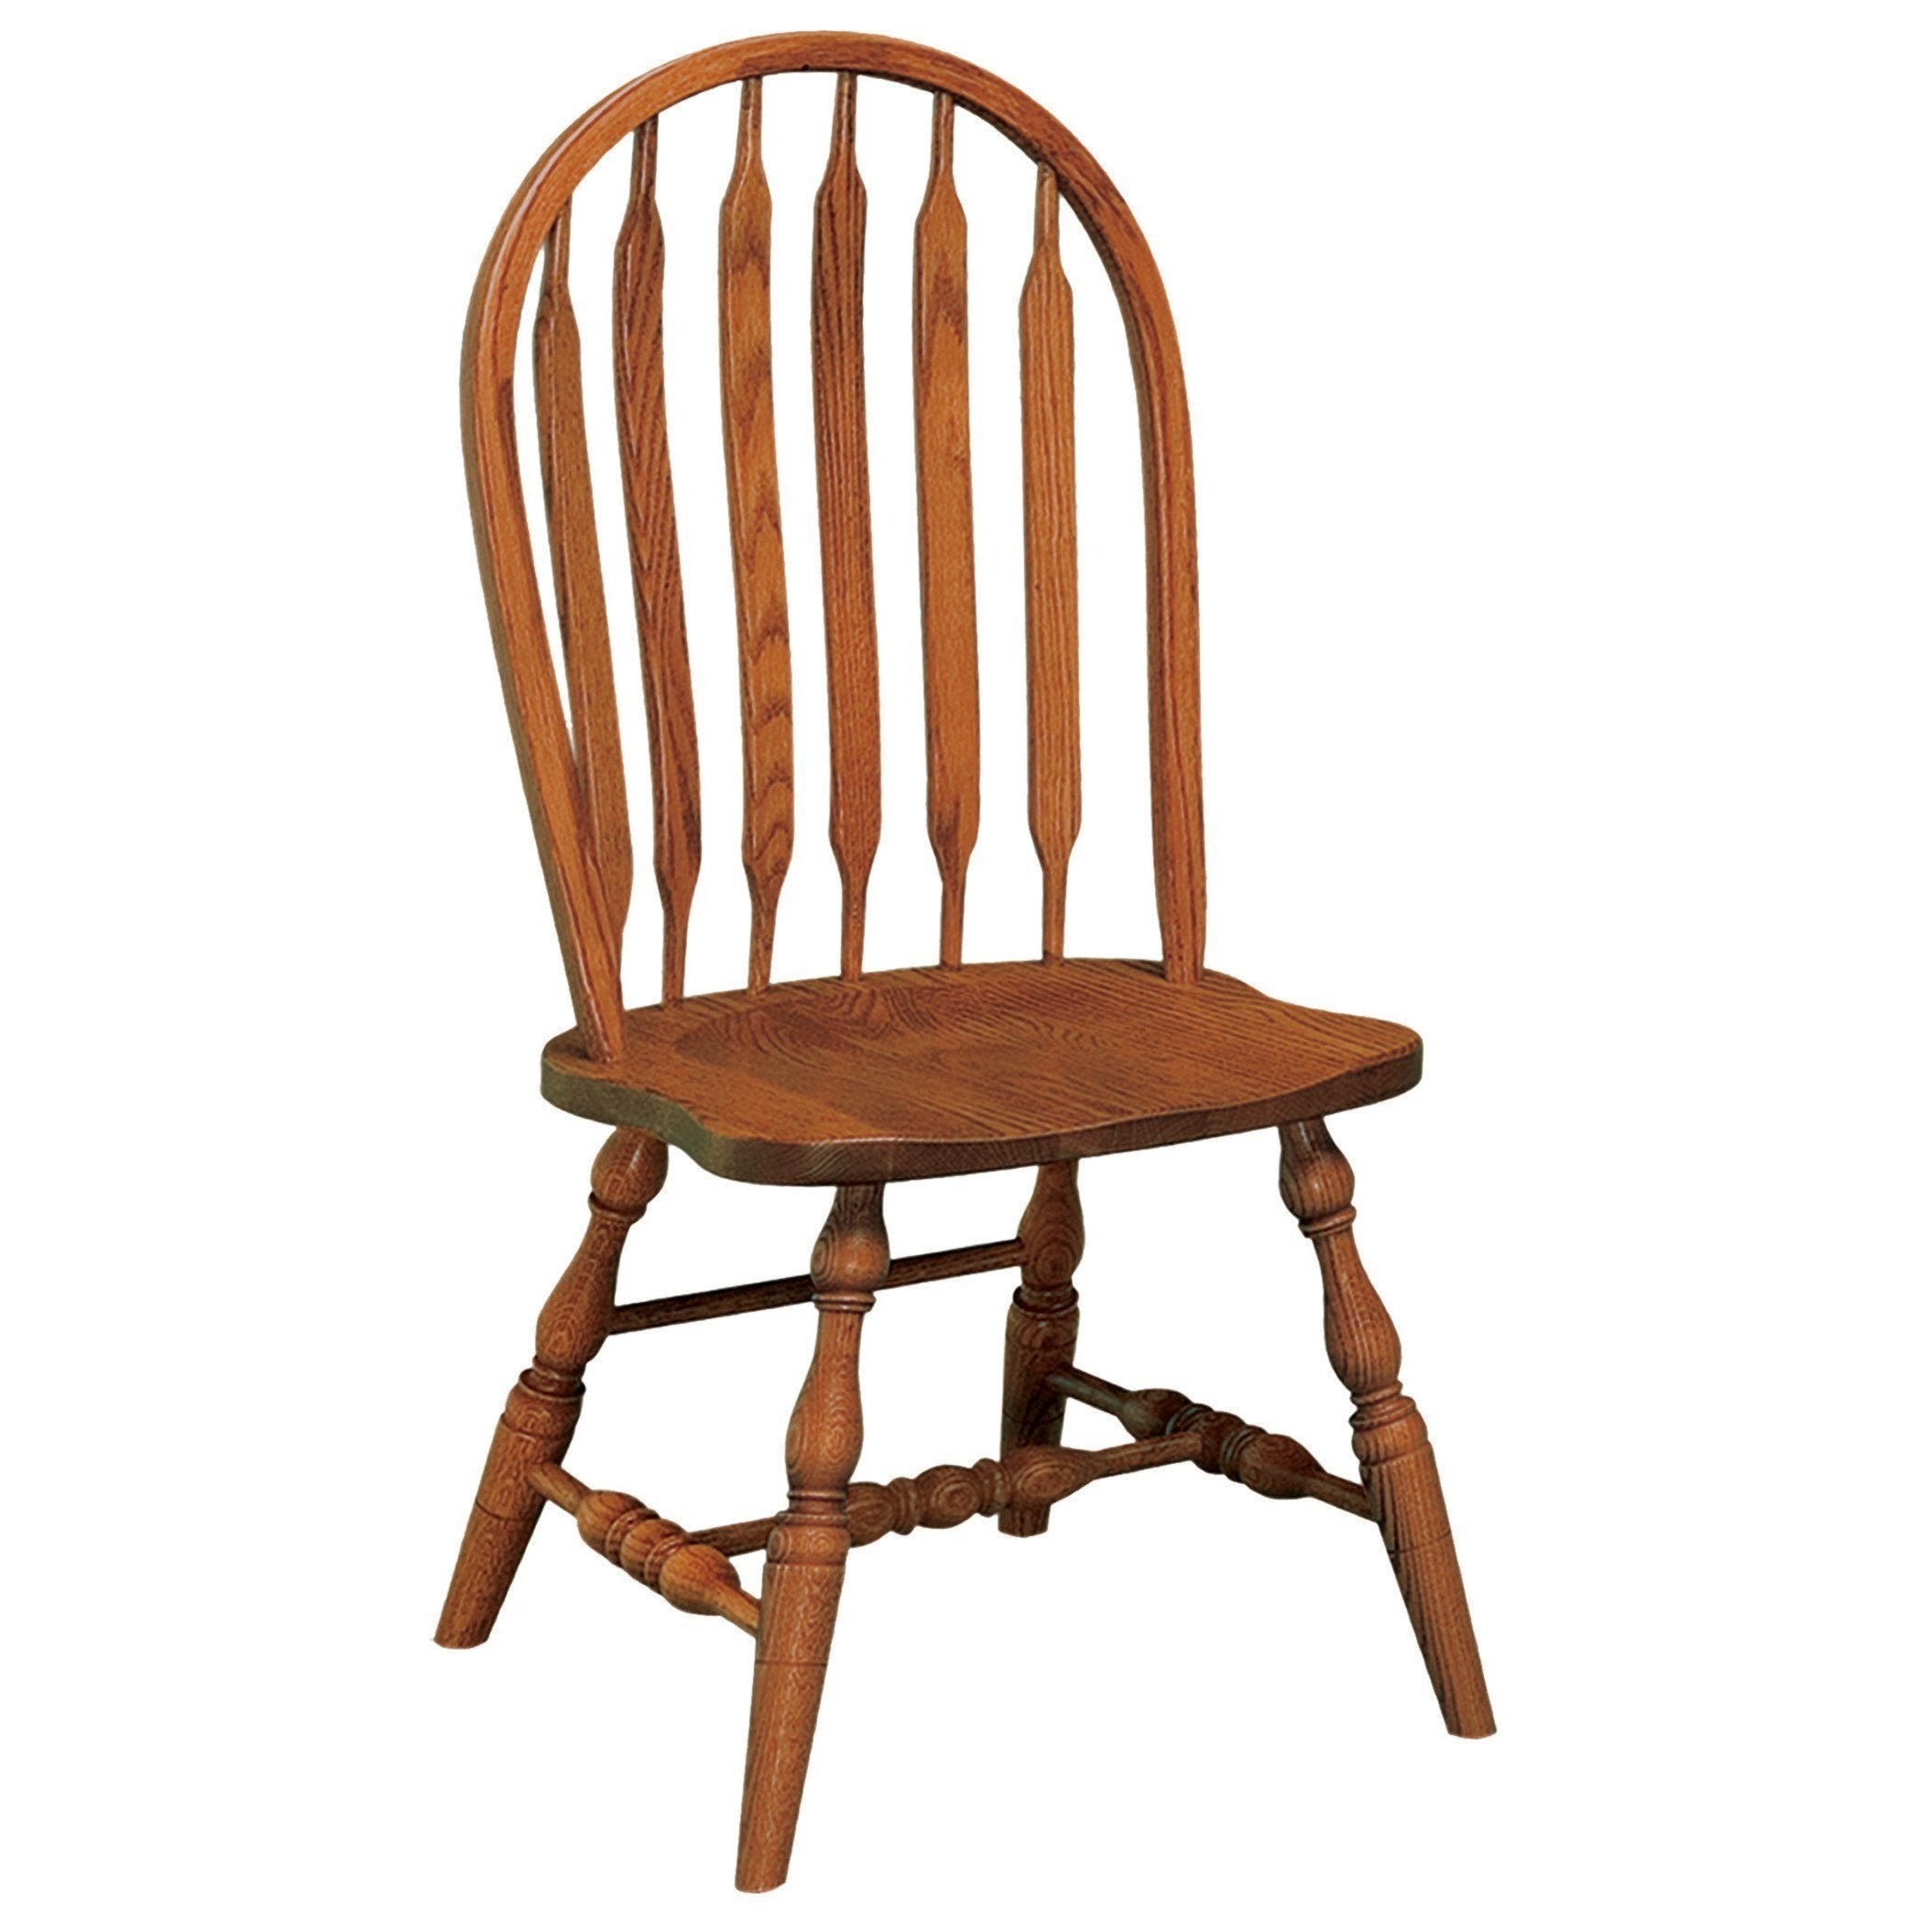 Amish Bent Paddle Chair